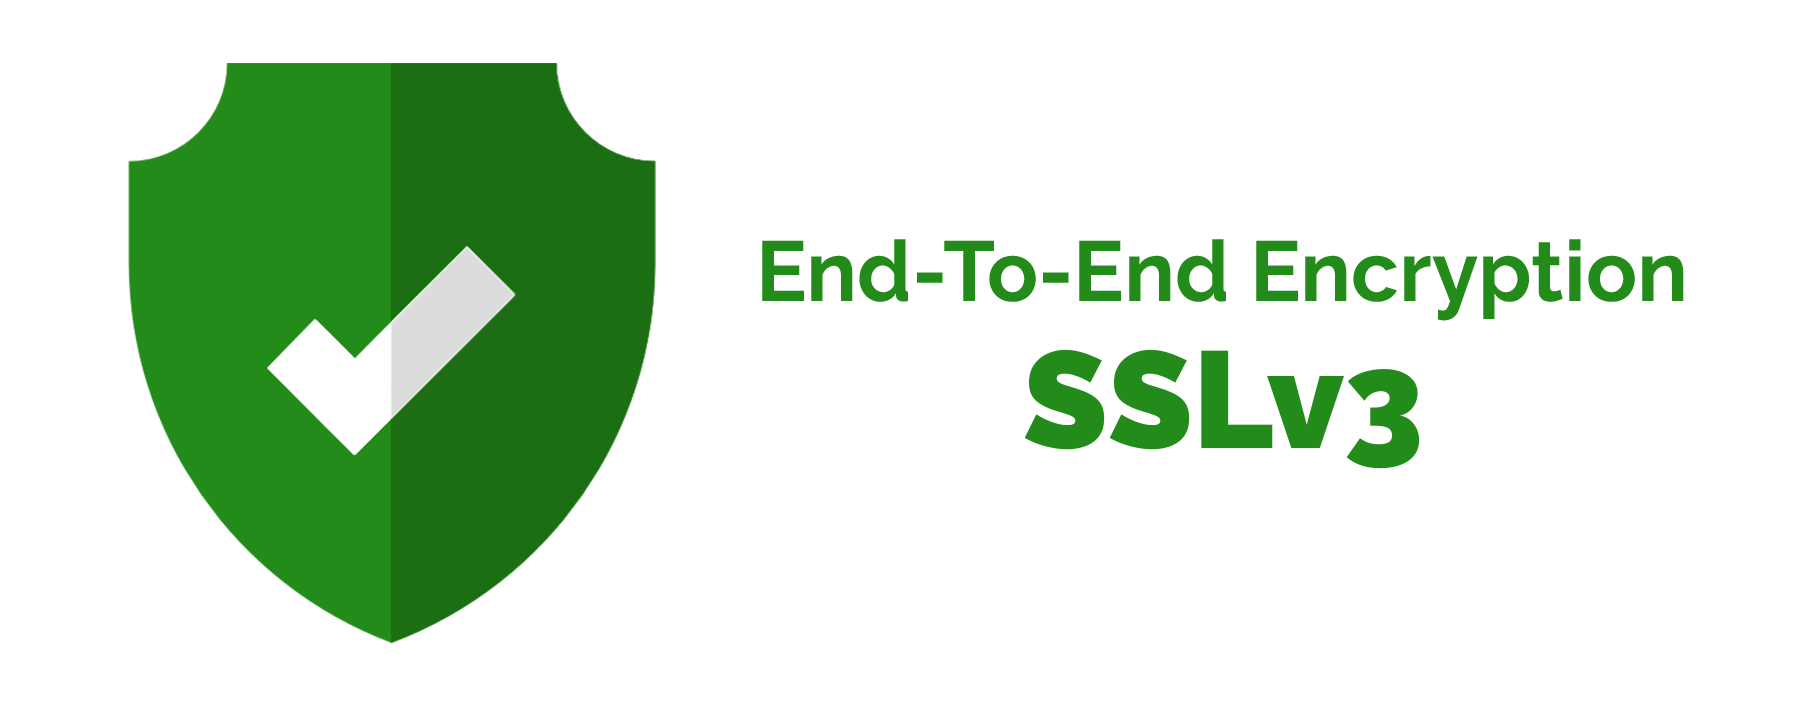 End-To-End Encrypted